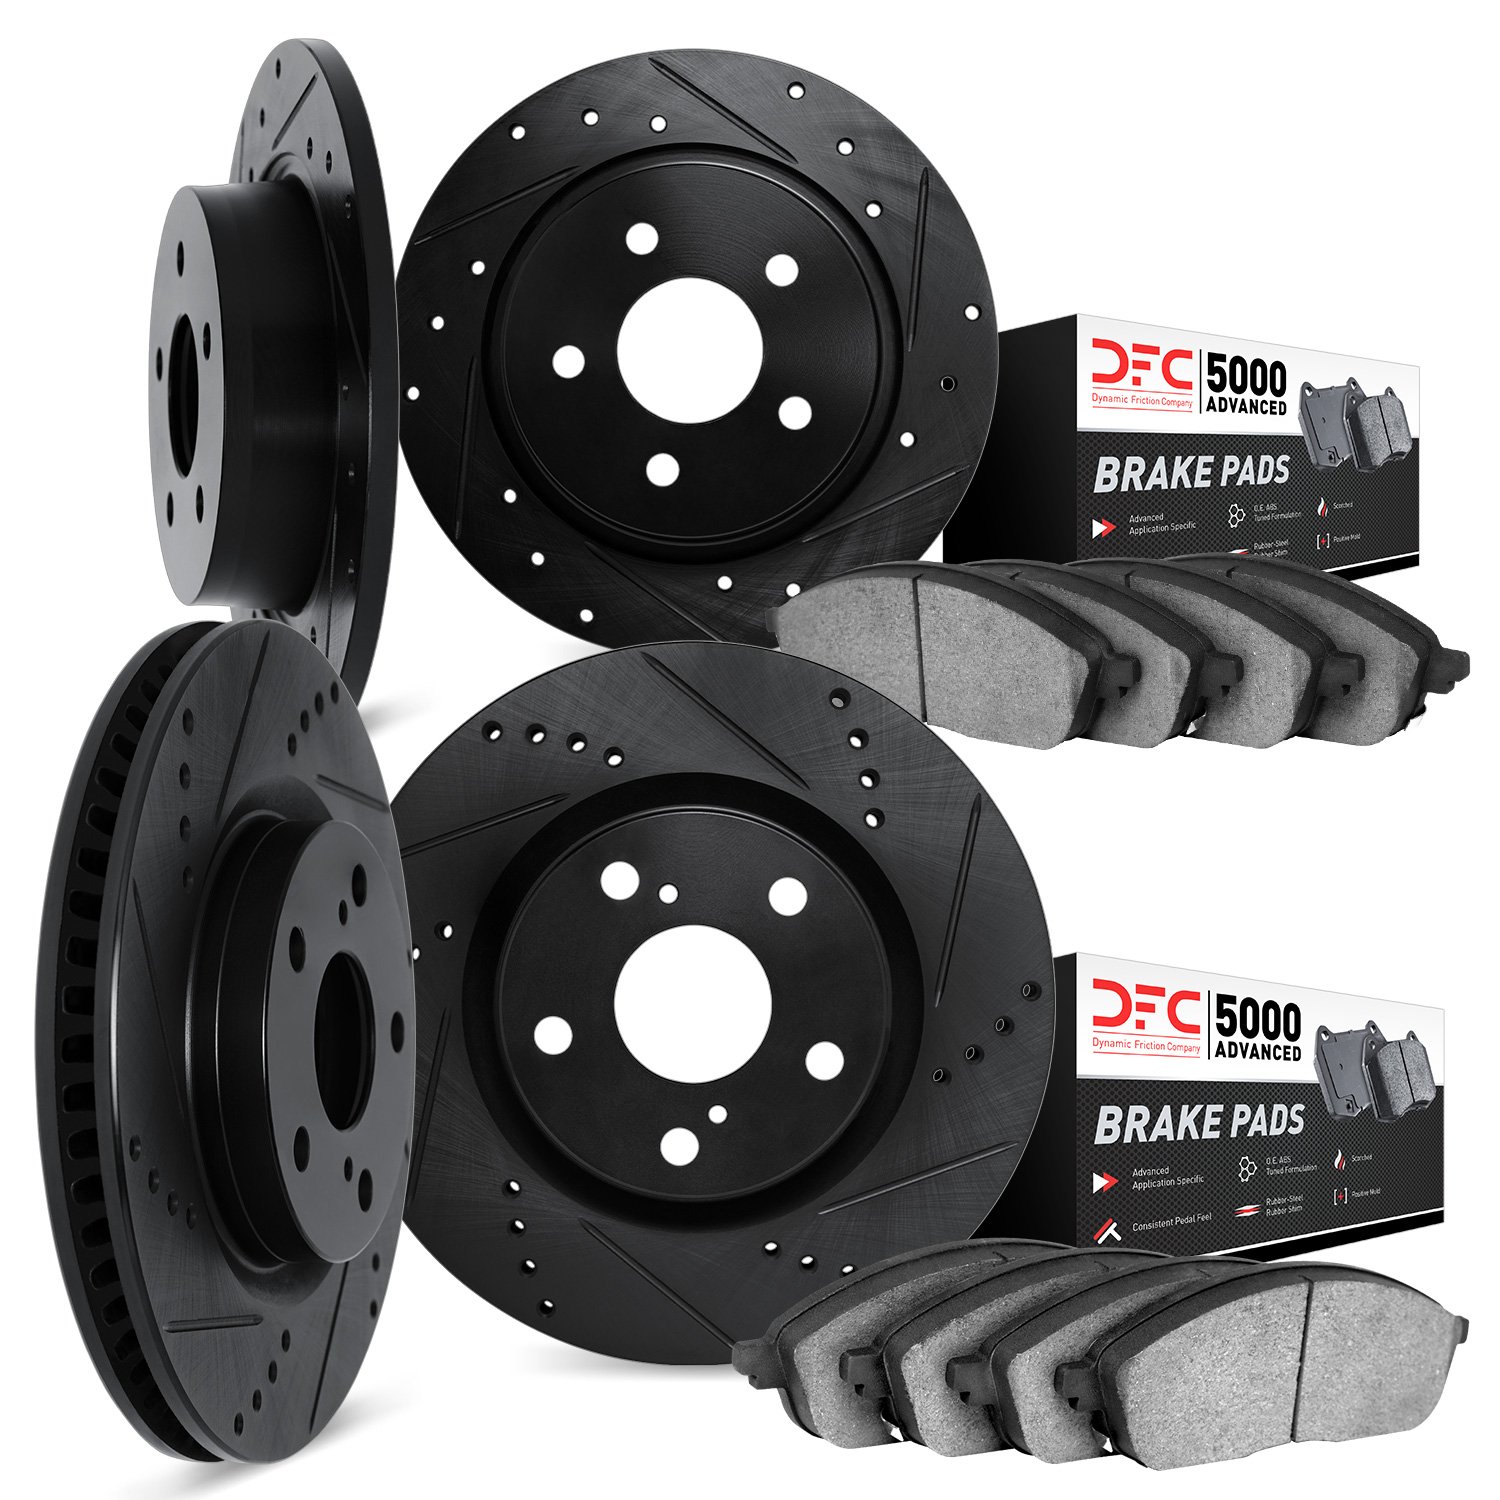 8504-31002 Drilled/Slotted Brake Rotors w/5000 Advanced Brake Pads Kit [Black], 1995-2001 BMW, Position: Front and Rear